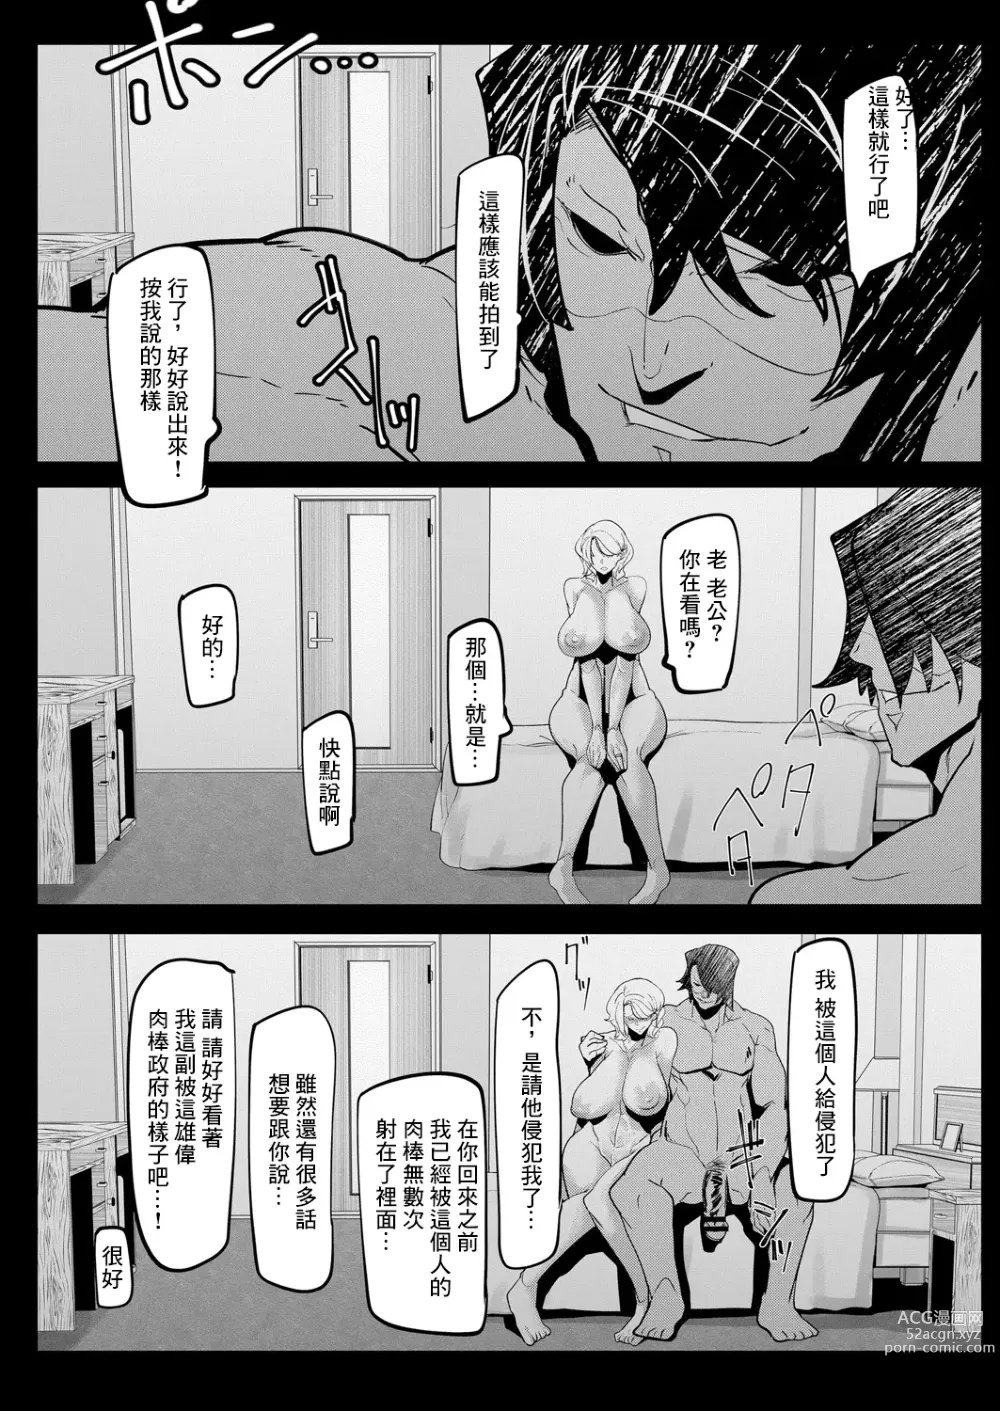 Page 18 of manga HERO DAY TIME Ch. 2